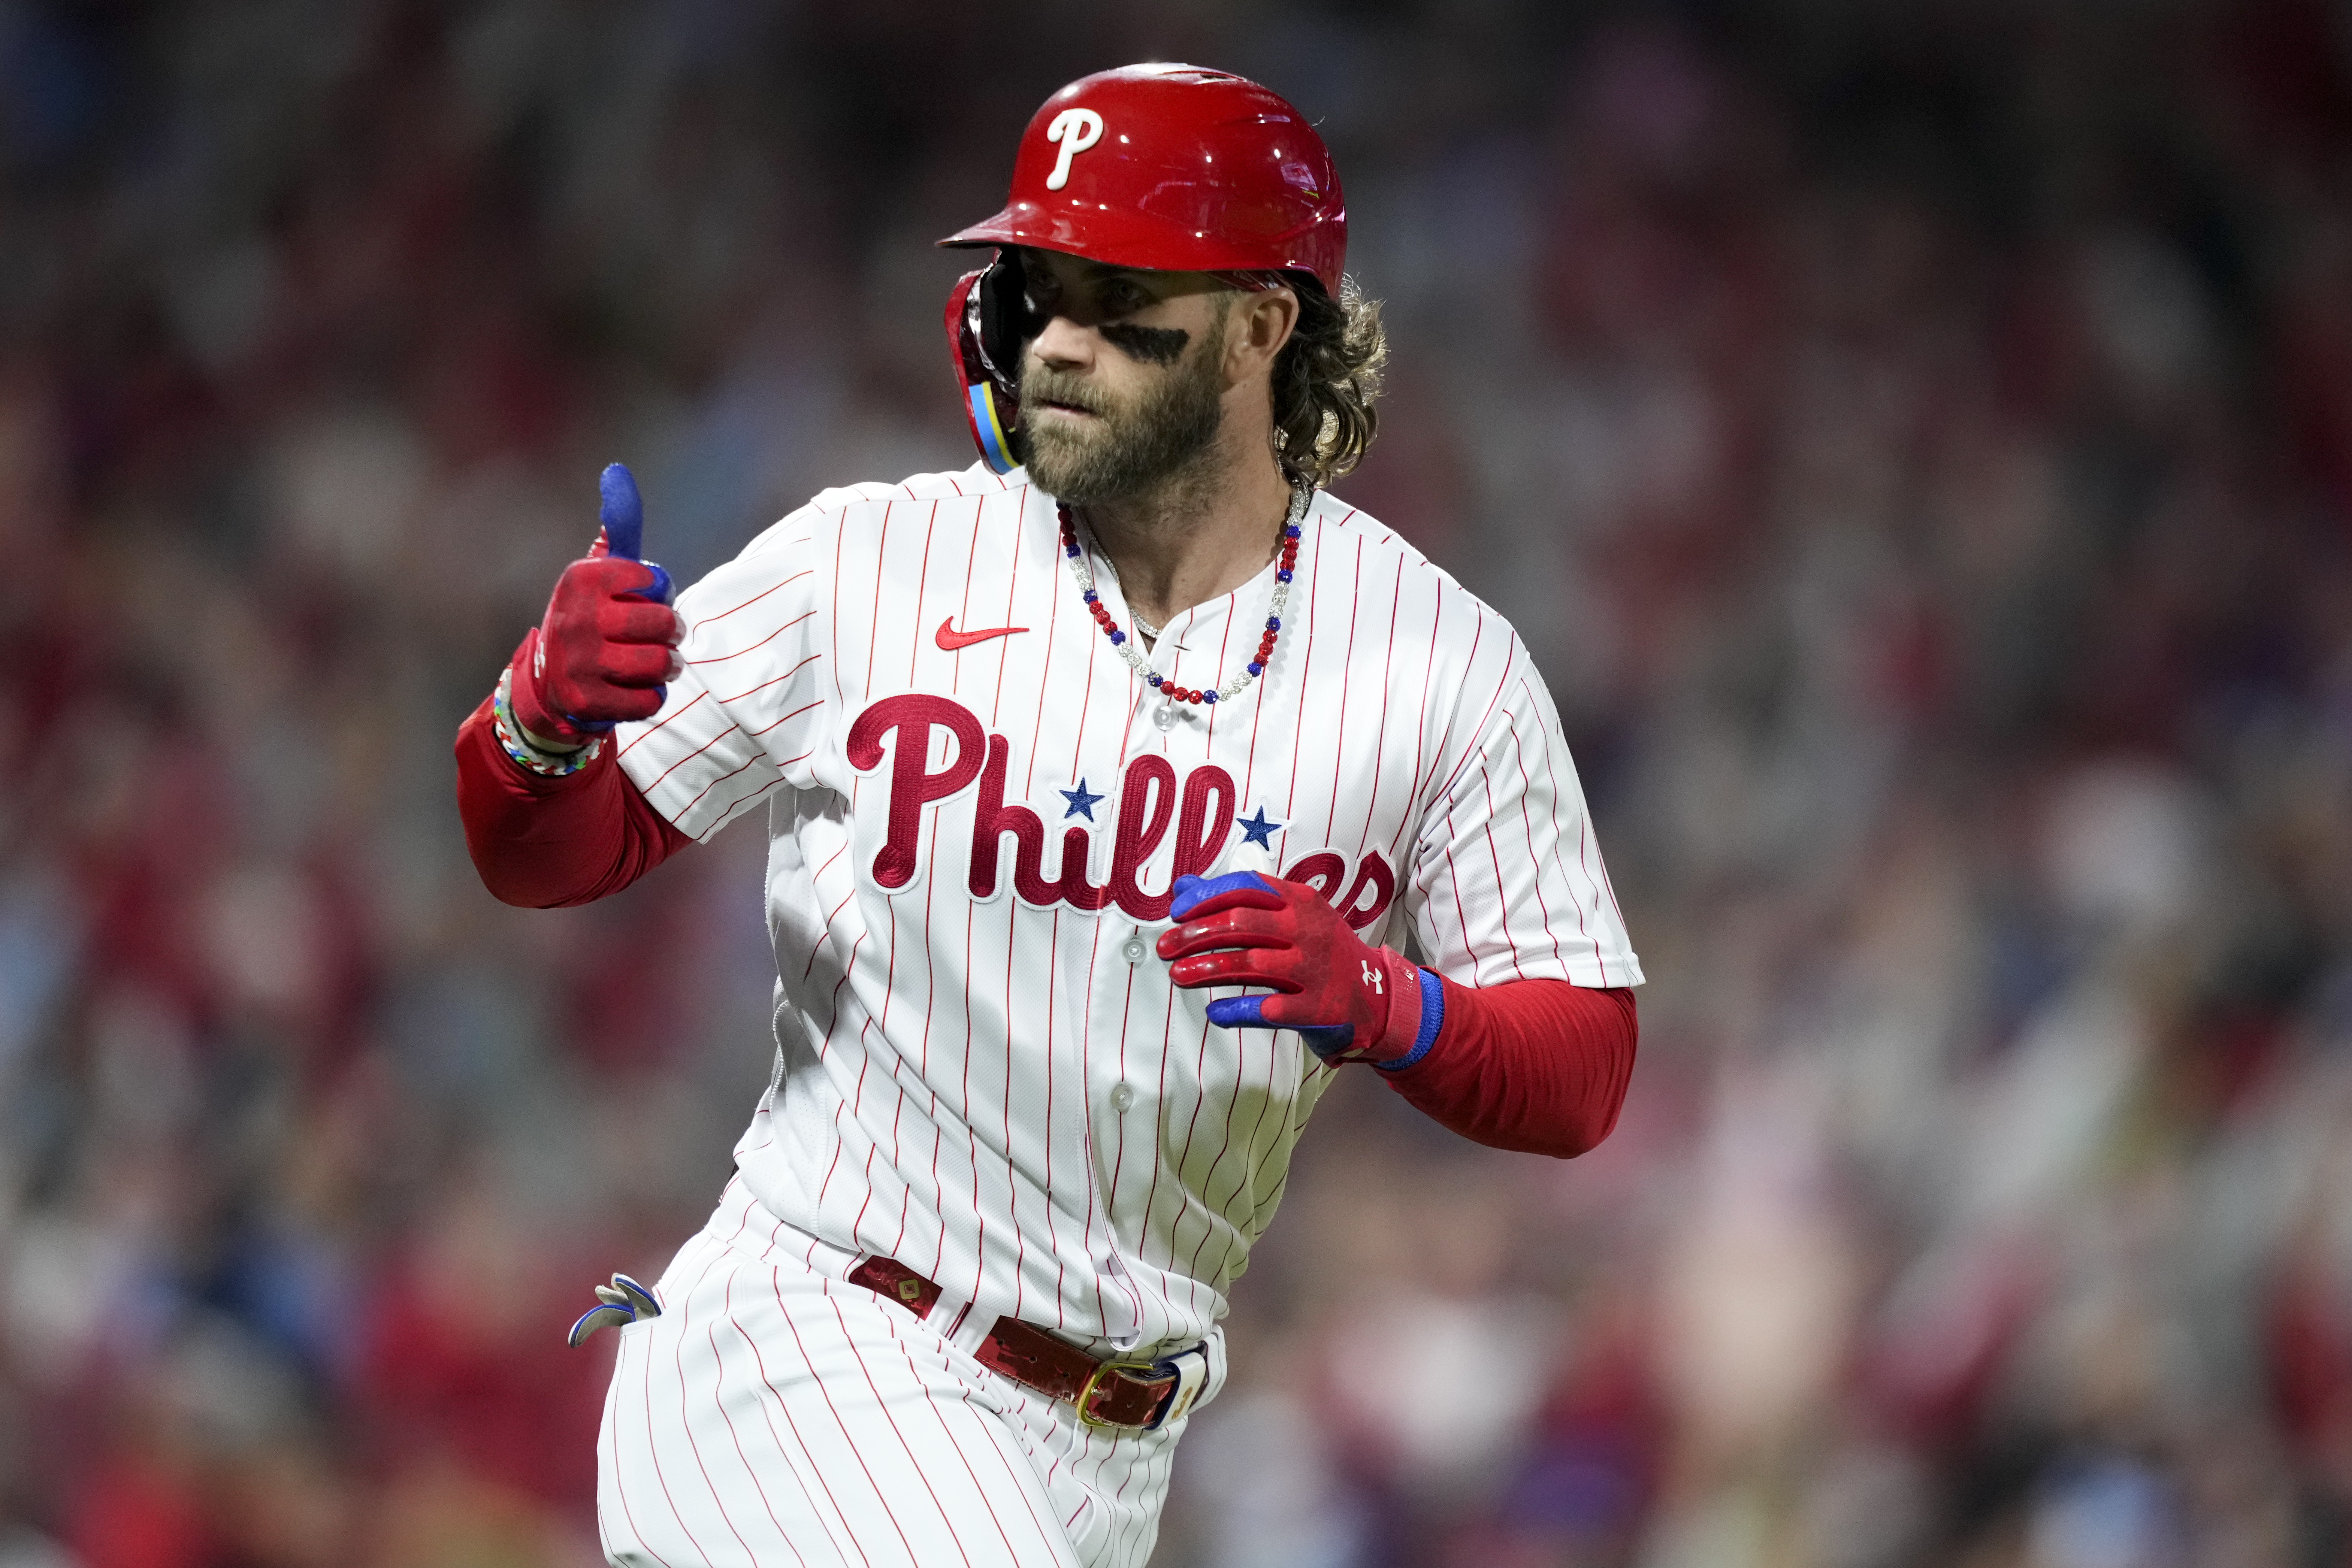 Bryce Harper's Phillies jersey sets sales record across all sports